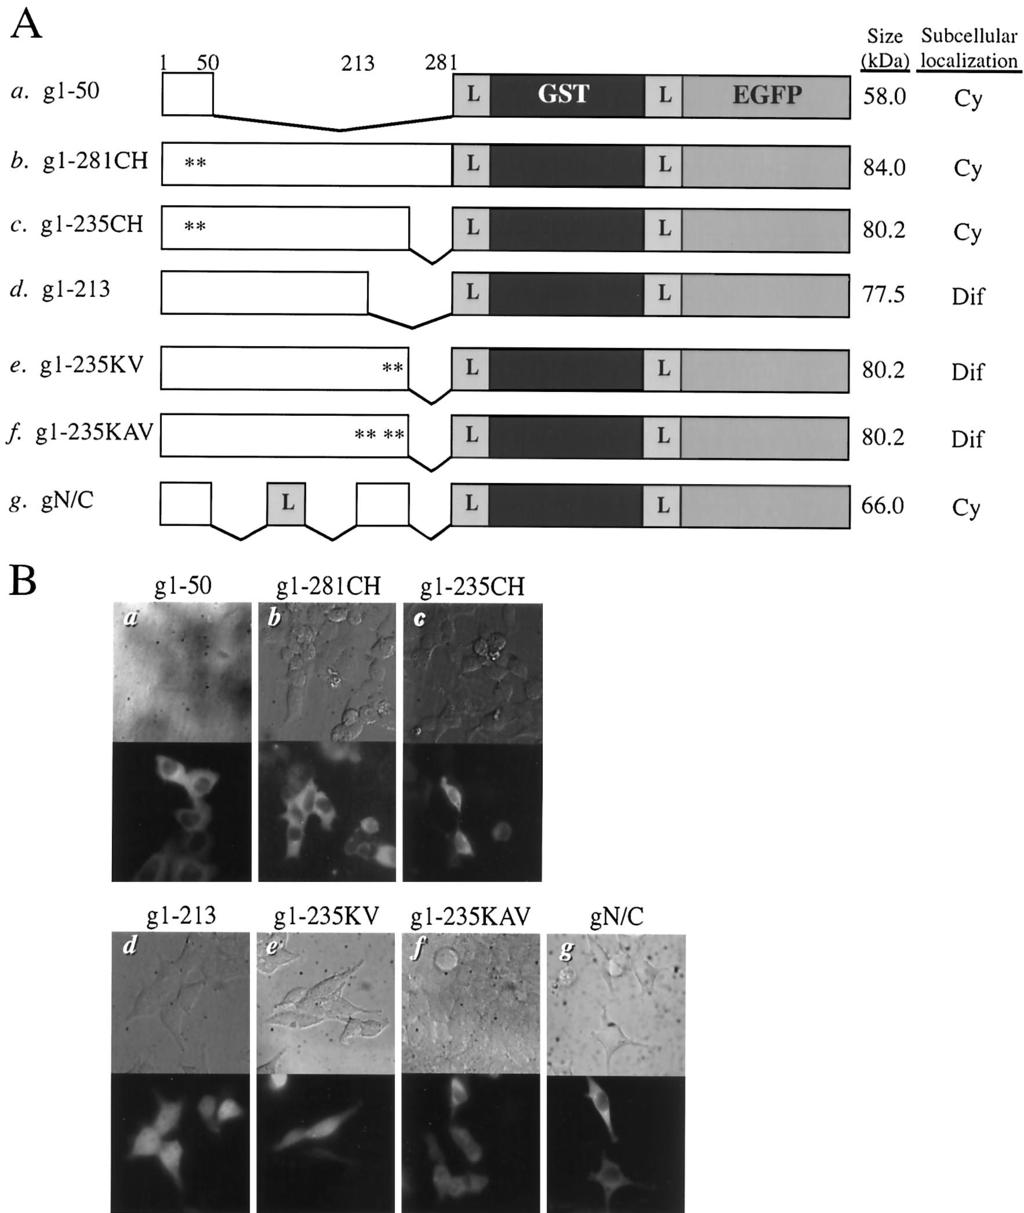 VOL. 77, 2003 KARYOPHILIC PROPERTY AND DETERMINANT OF FIV INTEGRASE 4523 FIG. 4. Role of the N-terminal zinc-binding domain and Lys residues within the region from 214 to 235 of FIV integrase in nuclear import.